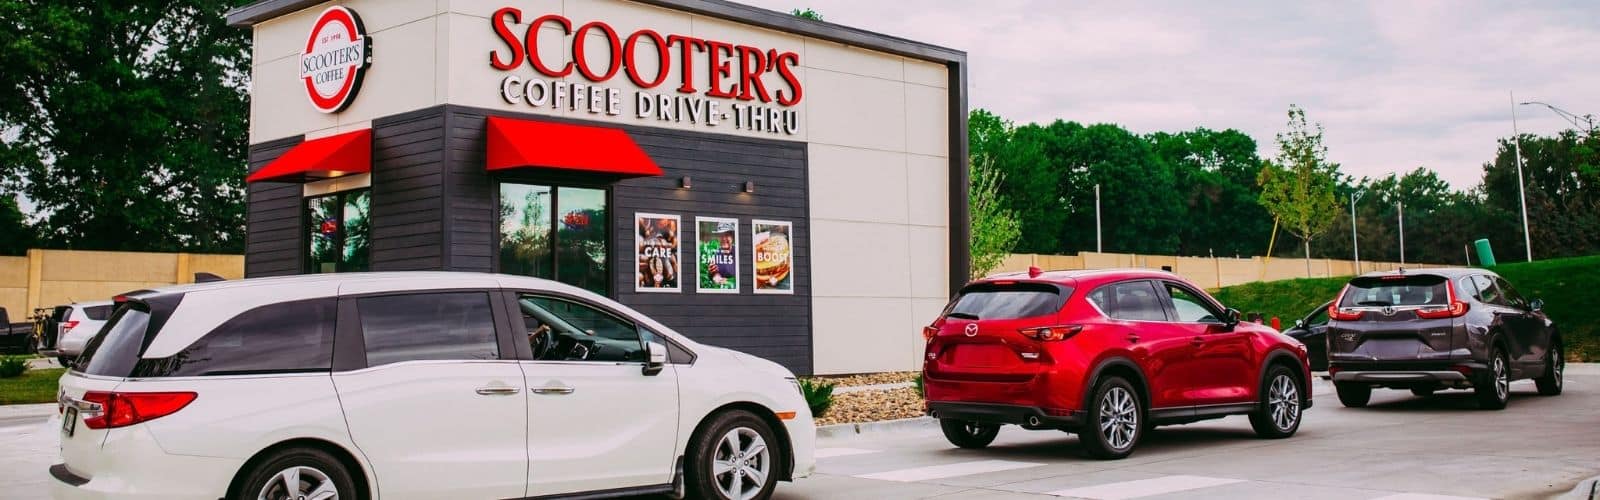 Scooter’s Coffee: A Success Story